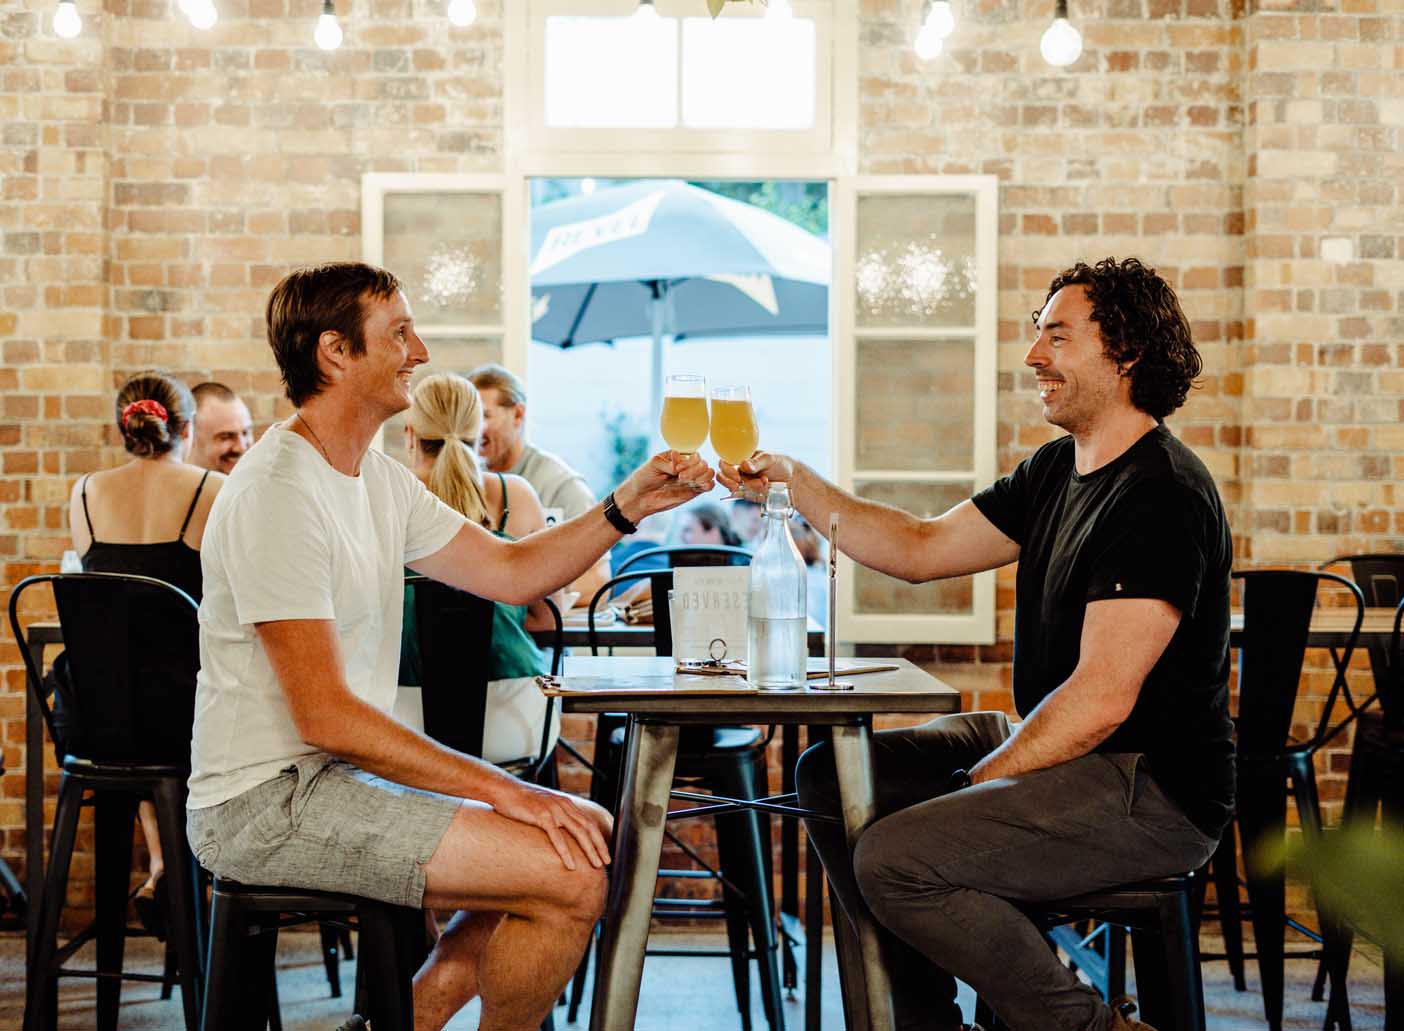 Revel Brewing Co. Rivermakers <br> Bars With Beer Gardens